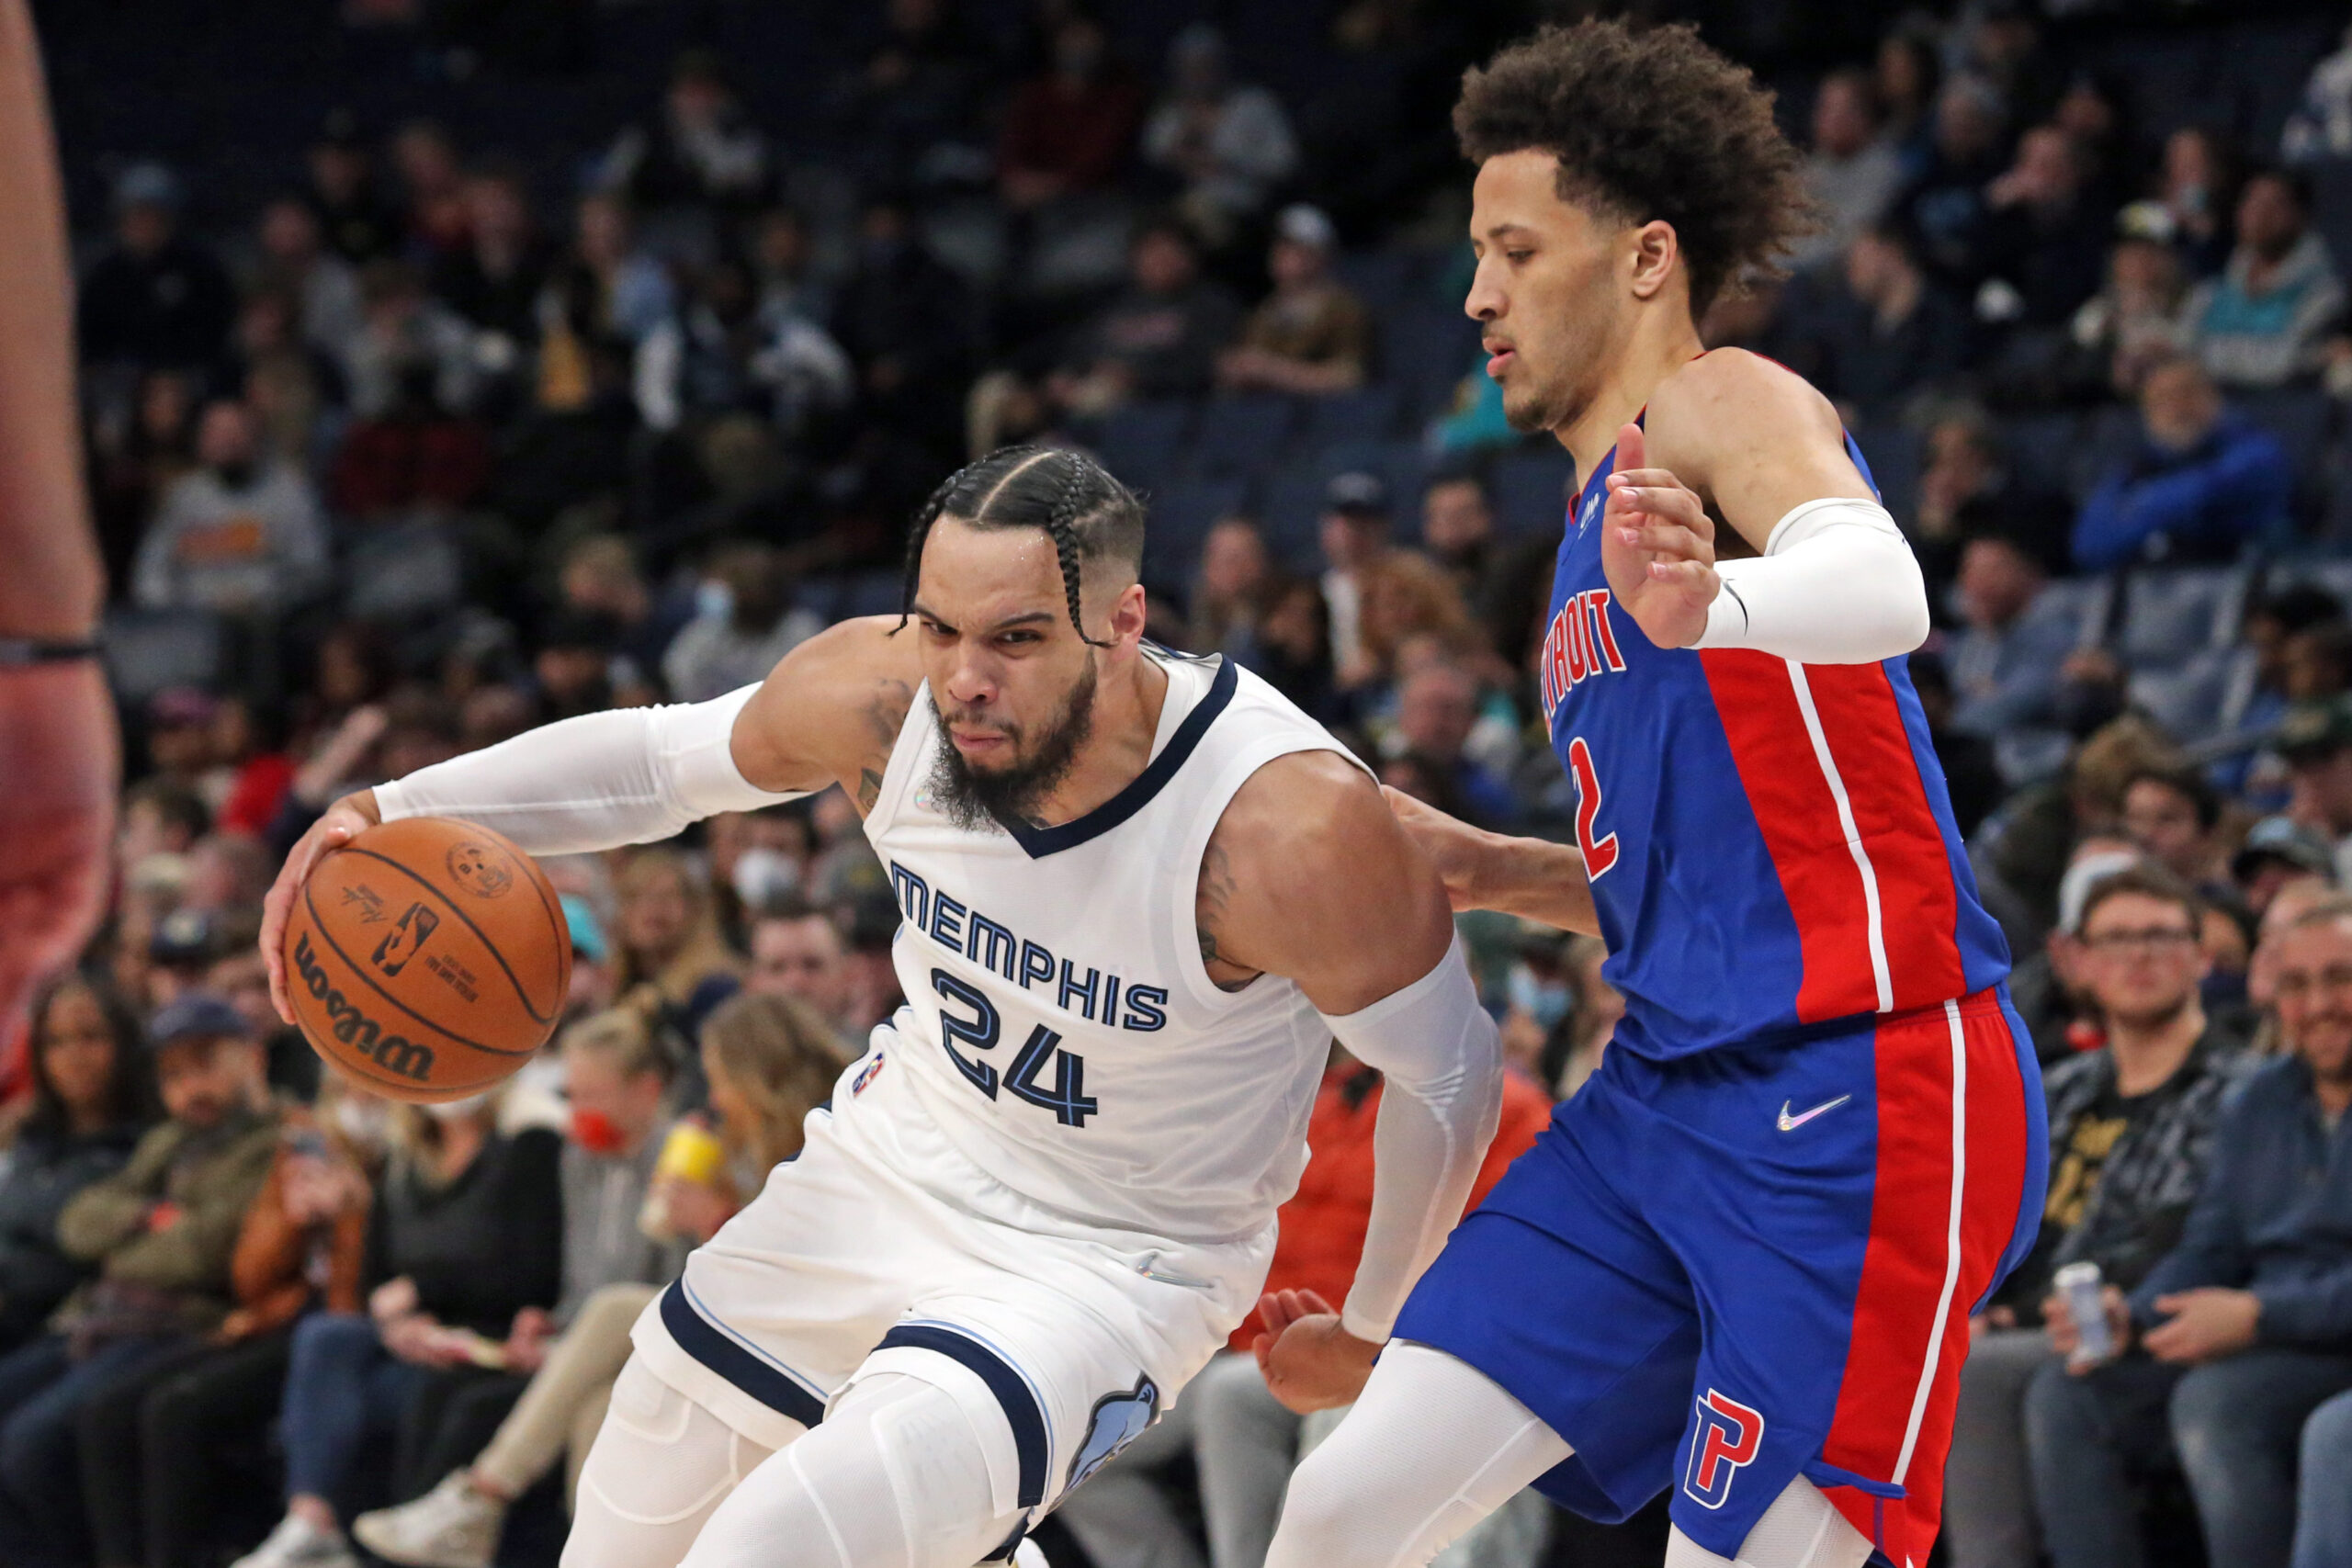 Jan 6, 2022; Memphis, Tennessee, USA; Memphis Grizzles guard Dillon Brooks (24) drives to the basket as Detroit Pistons guard Cade Cunningham (2) defends during the second half at FedExForum. Mandatory Credit: Petre Thomas-USA TODAY Sports. Article by Brandon Dent